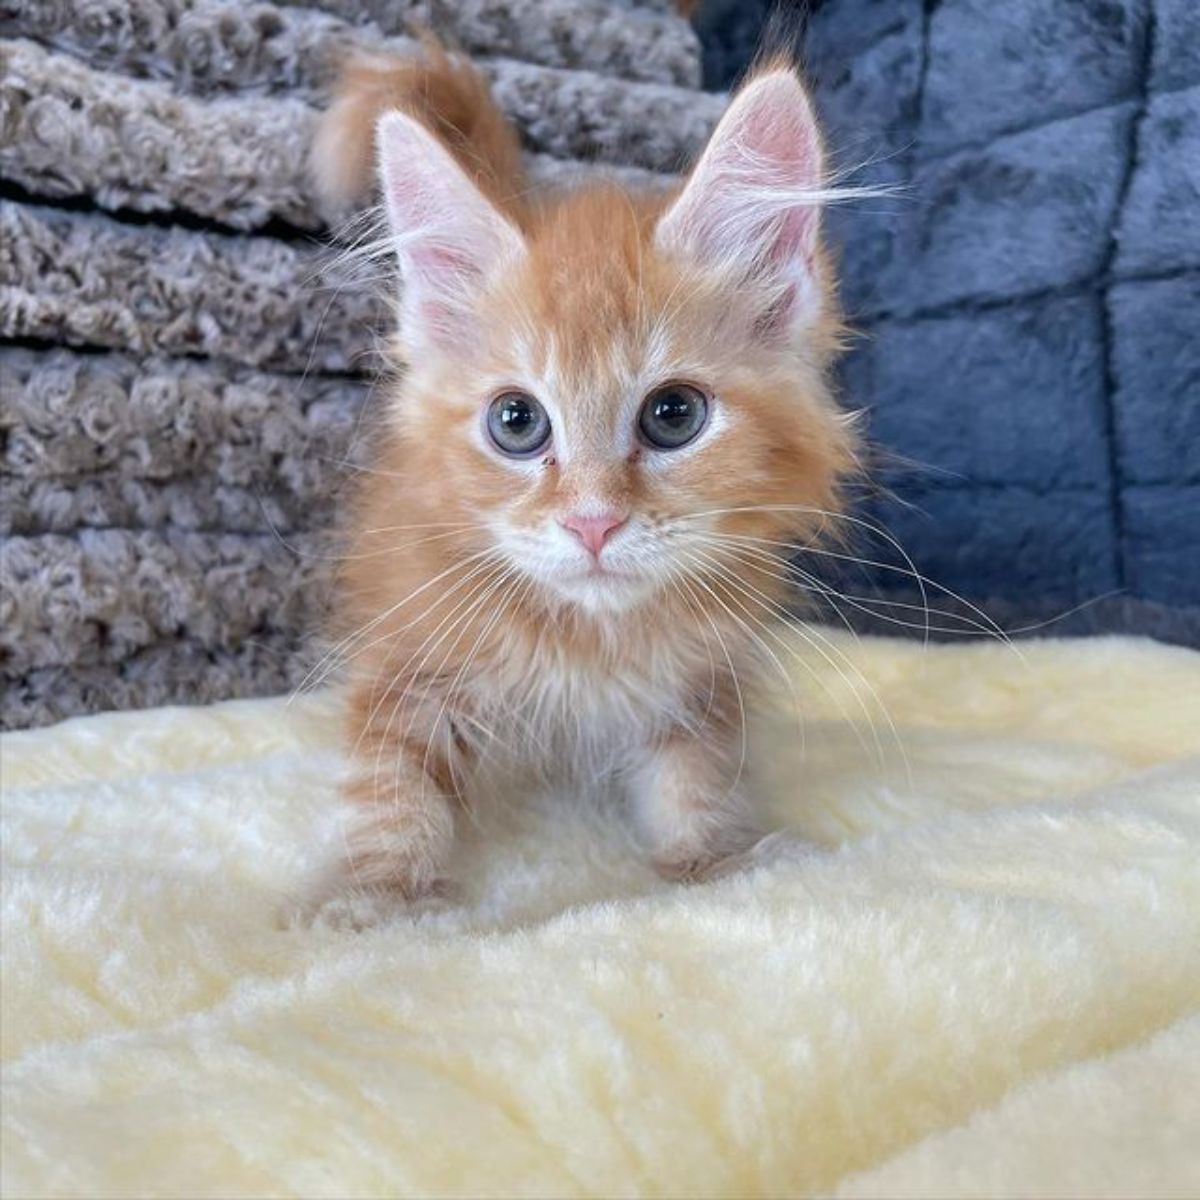 A cute fluffy ginger maine coon kitten walking on a yellow blanket.